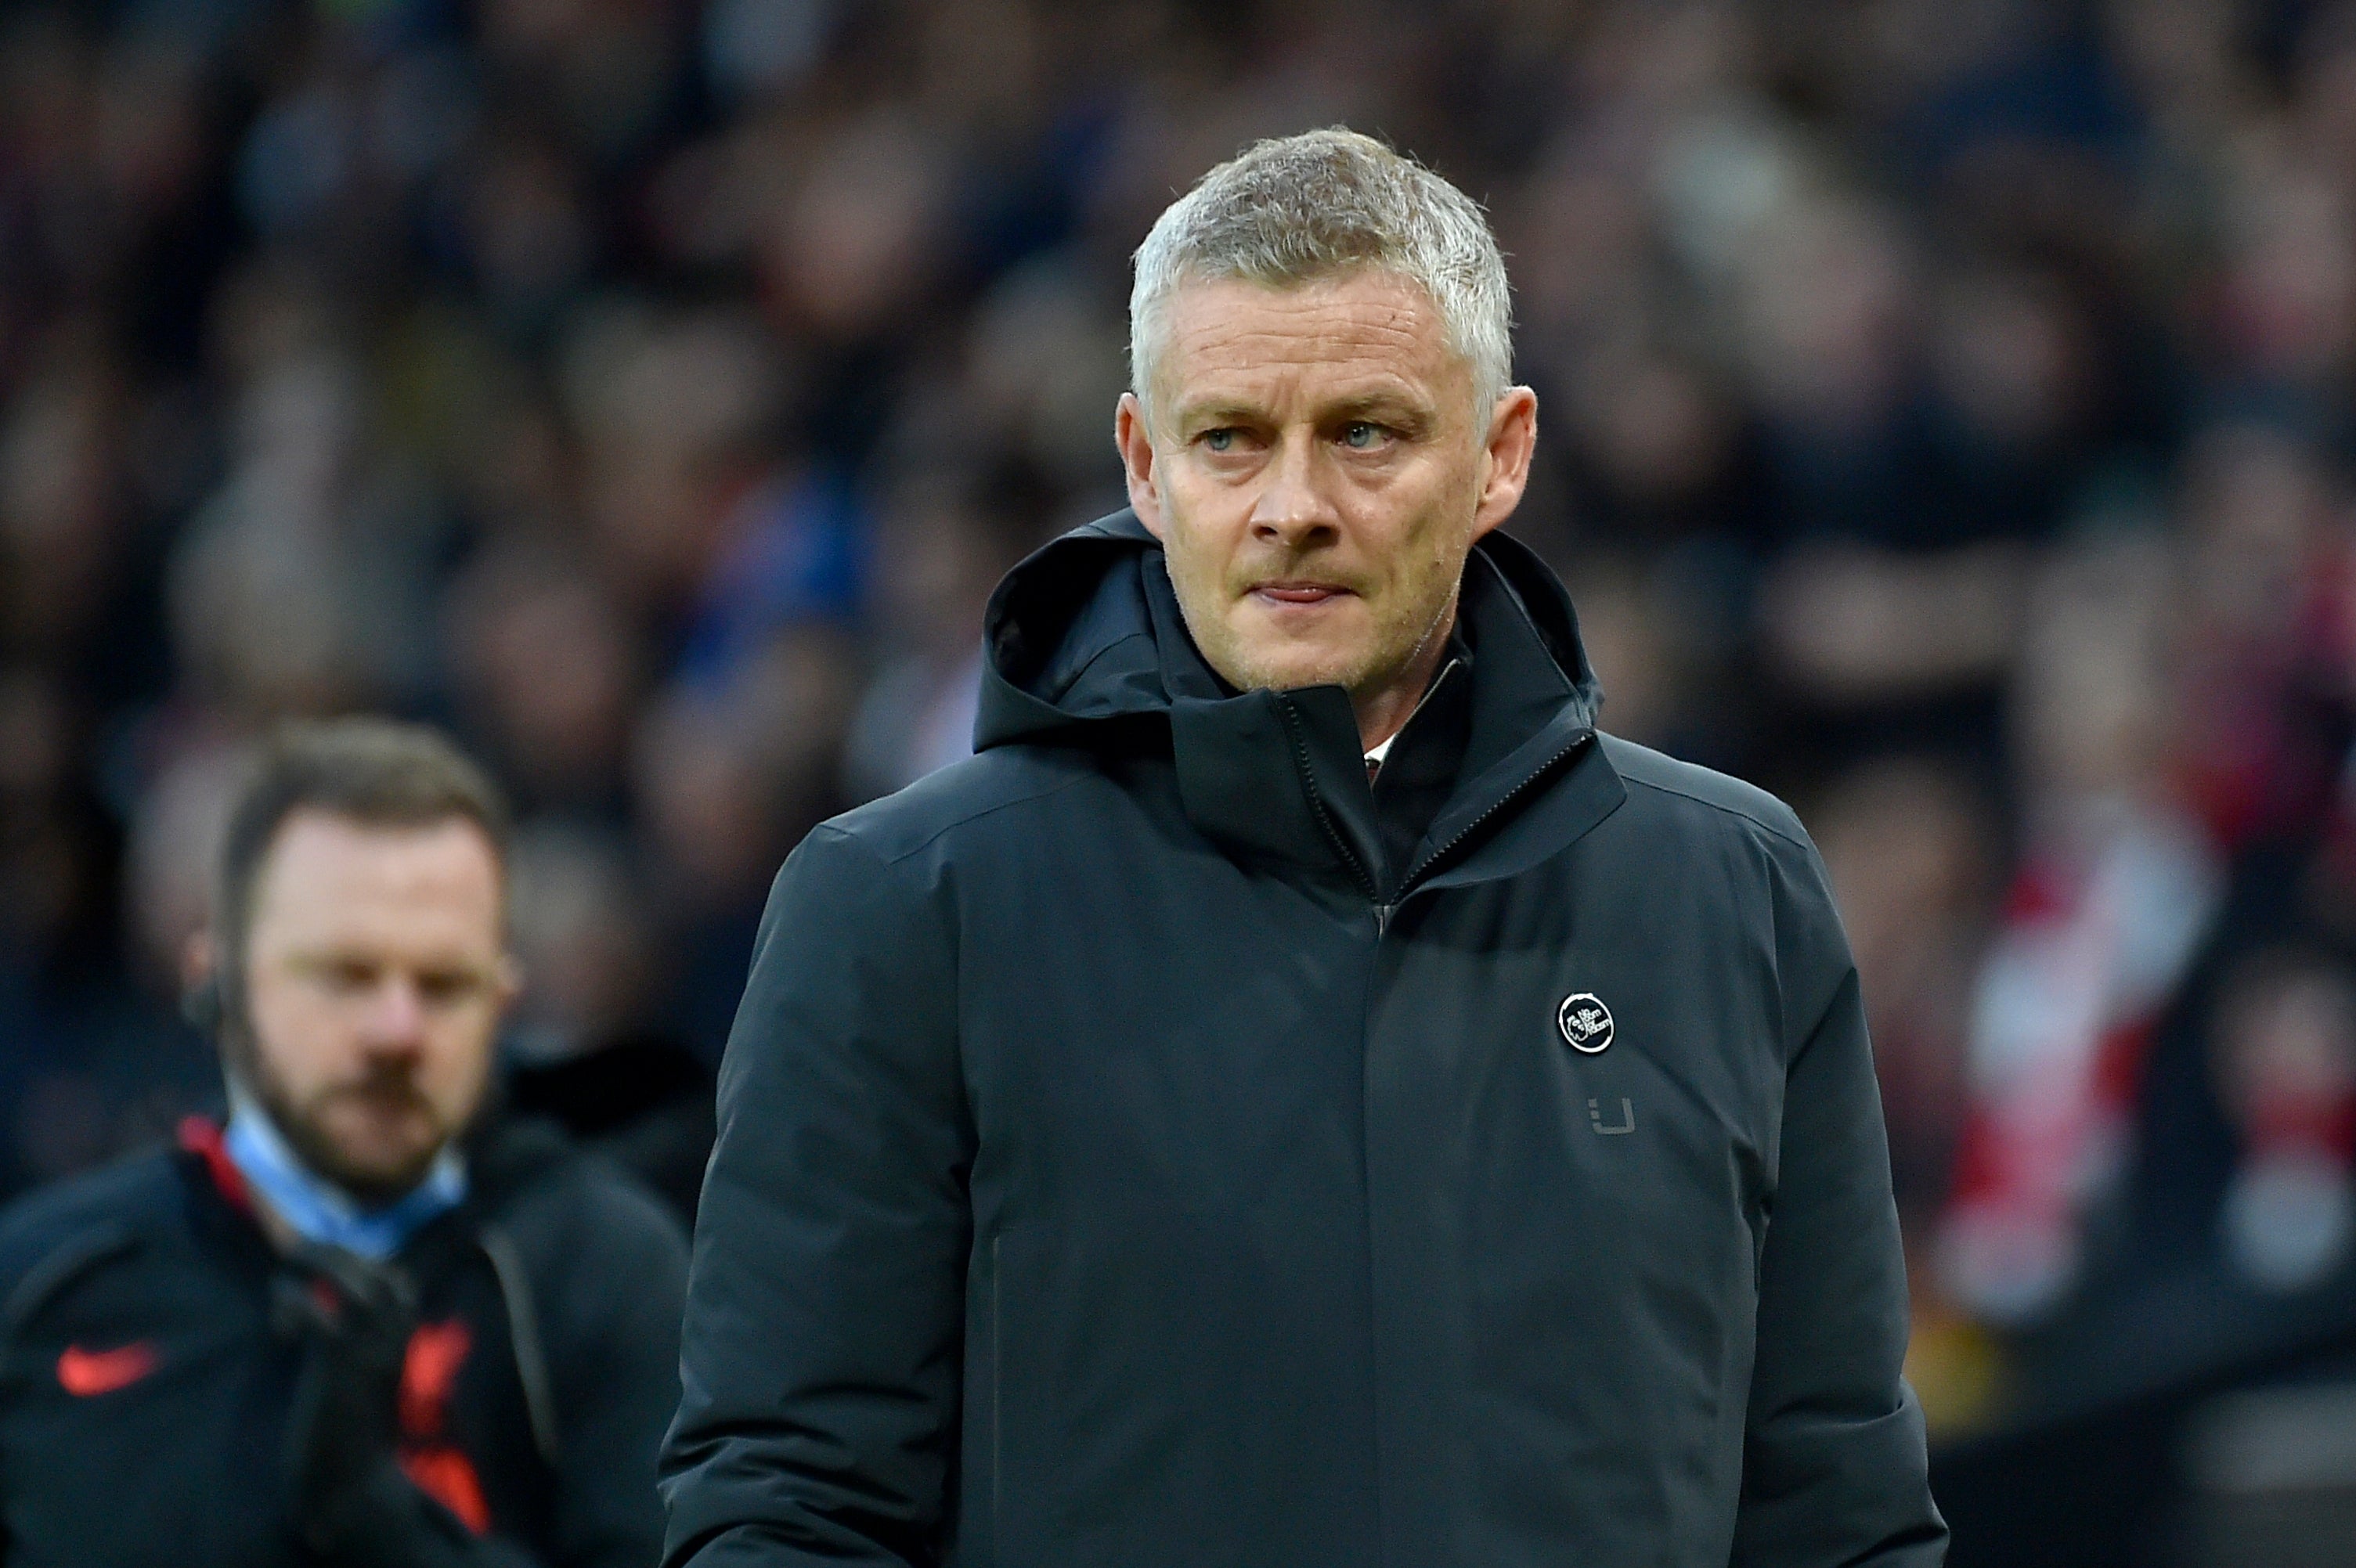 Ole Gunnar Solskjaer is struggling to hold onto his job at Old Trafford